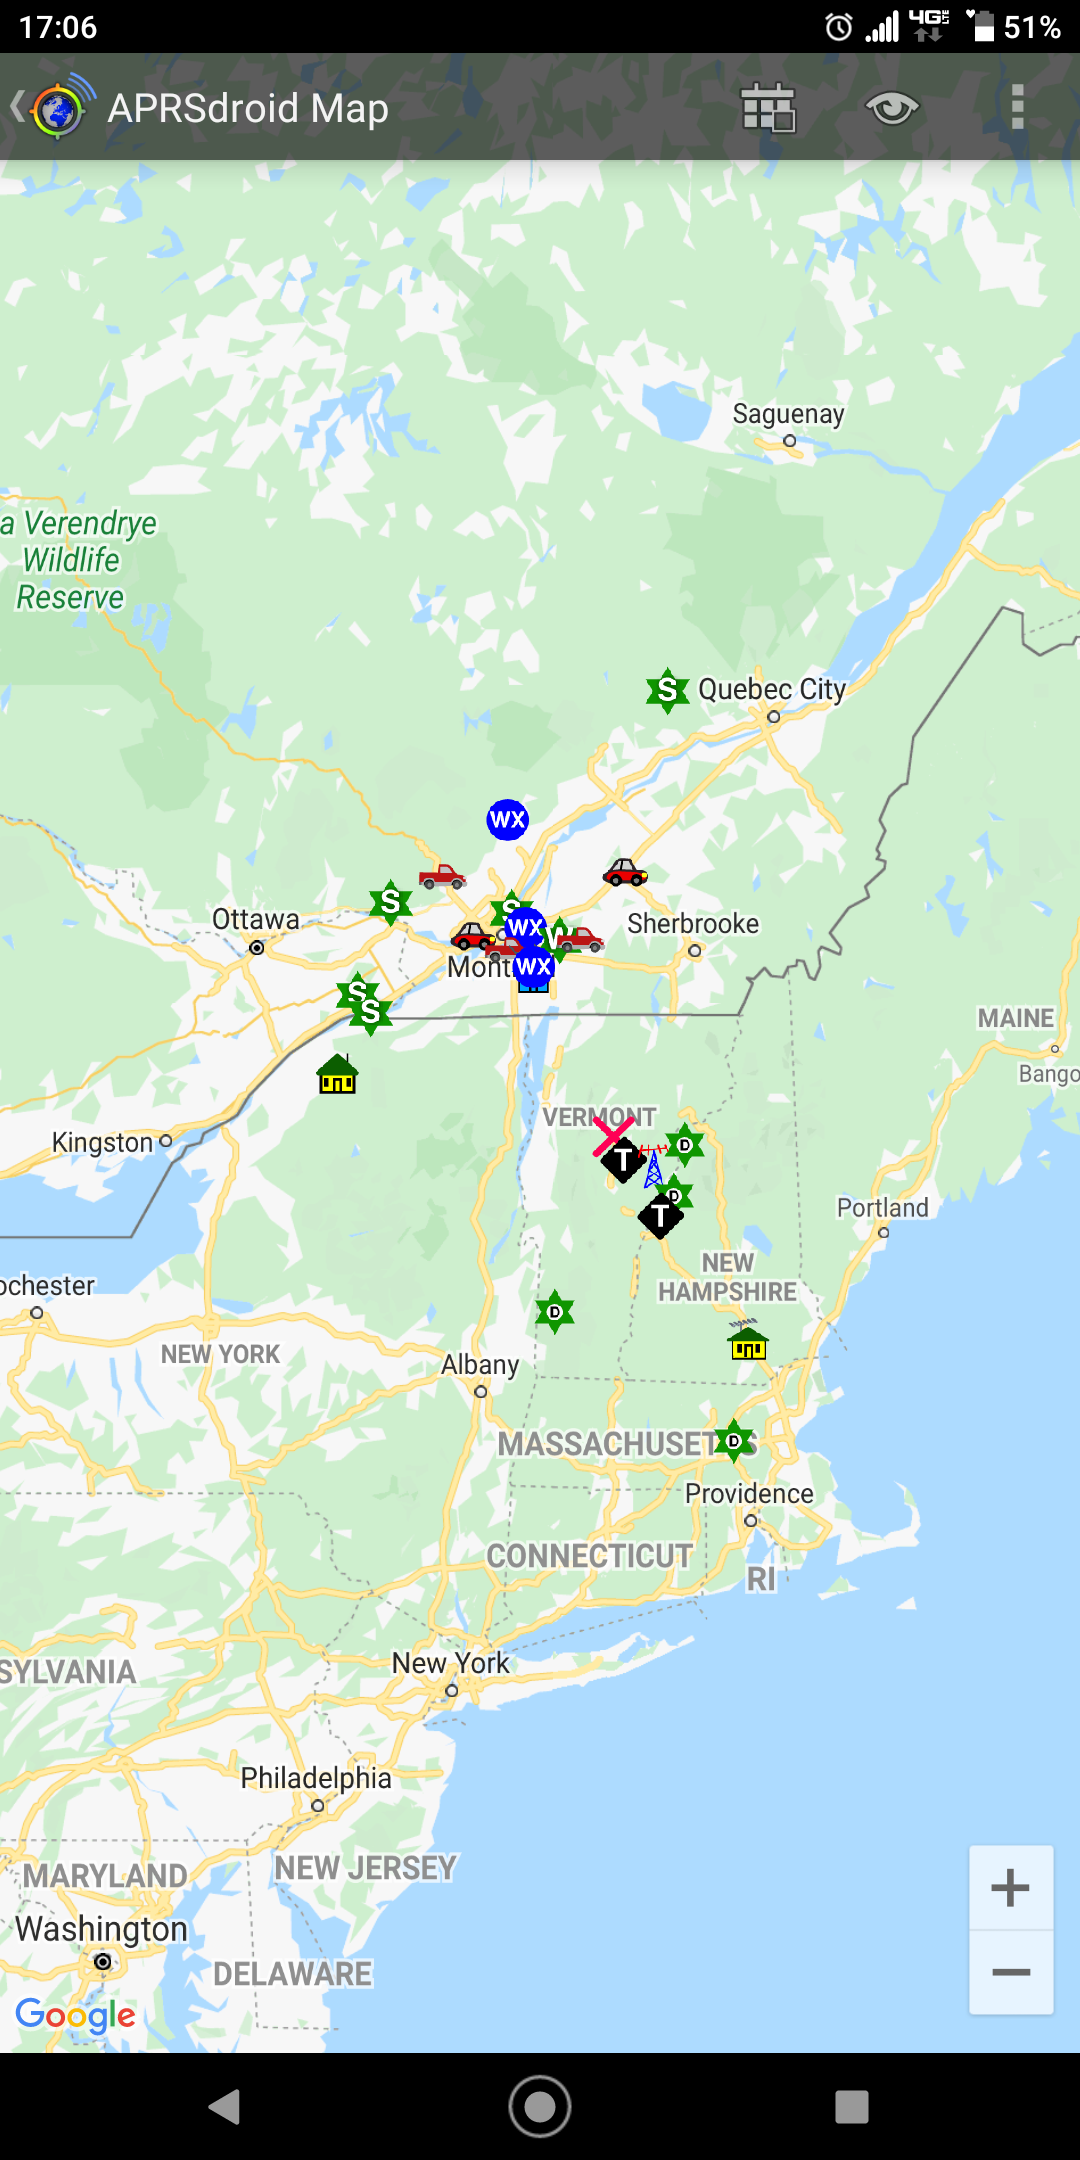 APRSDroid screenshot showing several APRS icons ranging from Qubec City Canada through eastern Massachusets.